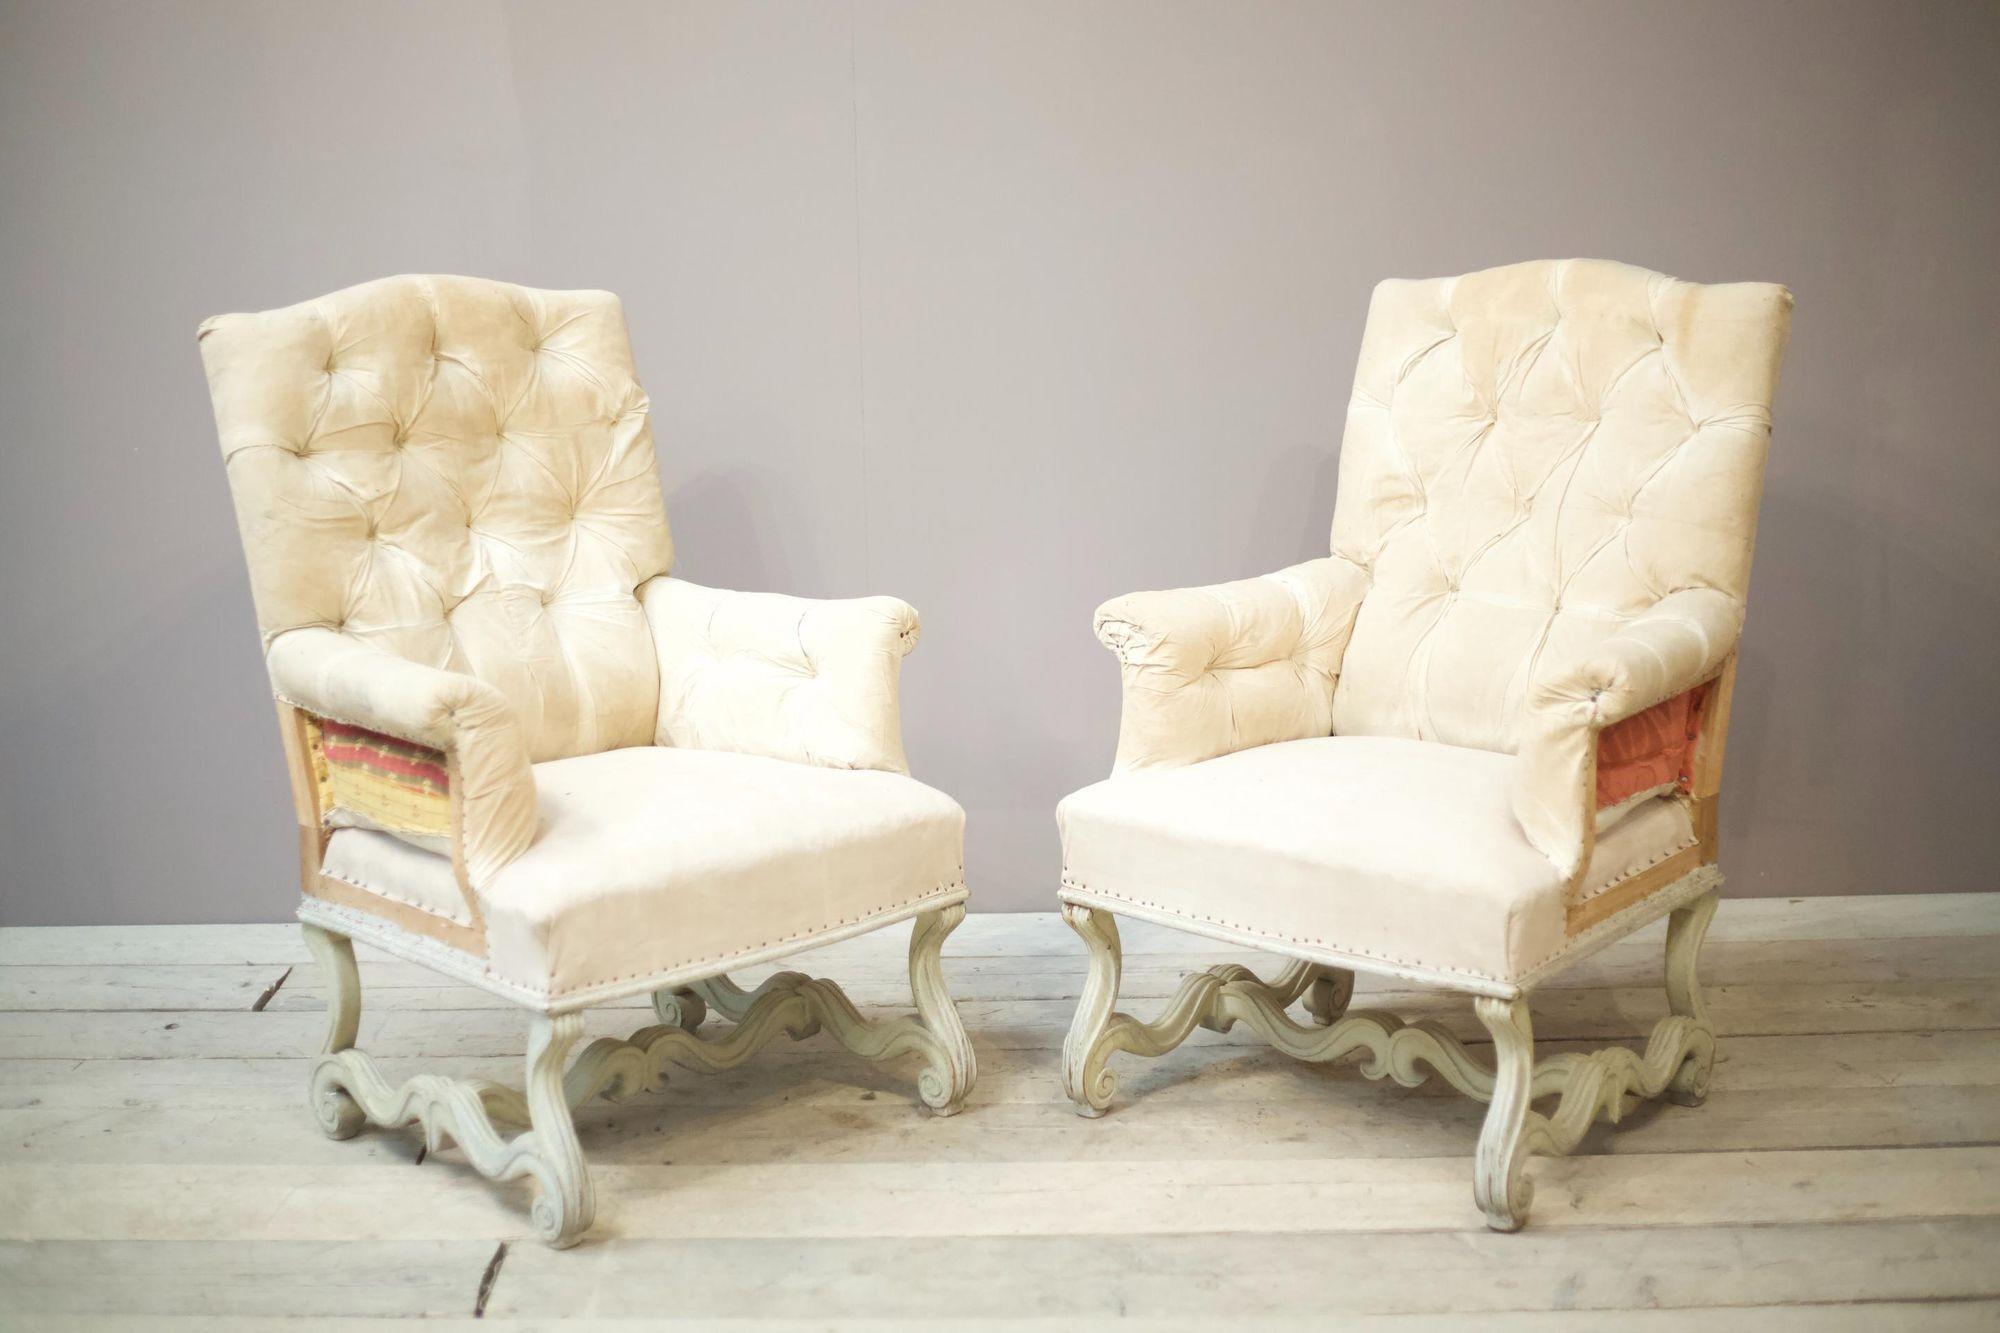 These are a stunning pair of 19th century French armchairs with a very nicely carved painted frame and shaped back. The size of these is also impressive making the chairs a great decorative addition to a room. The paint isn't original but not new